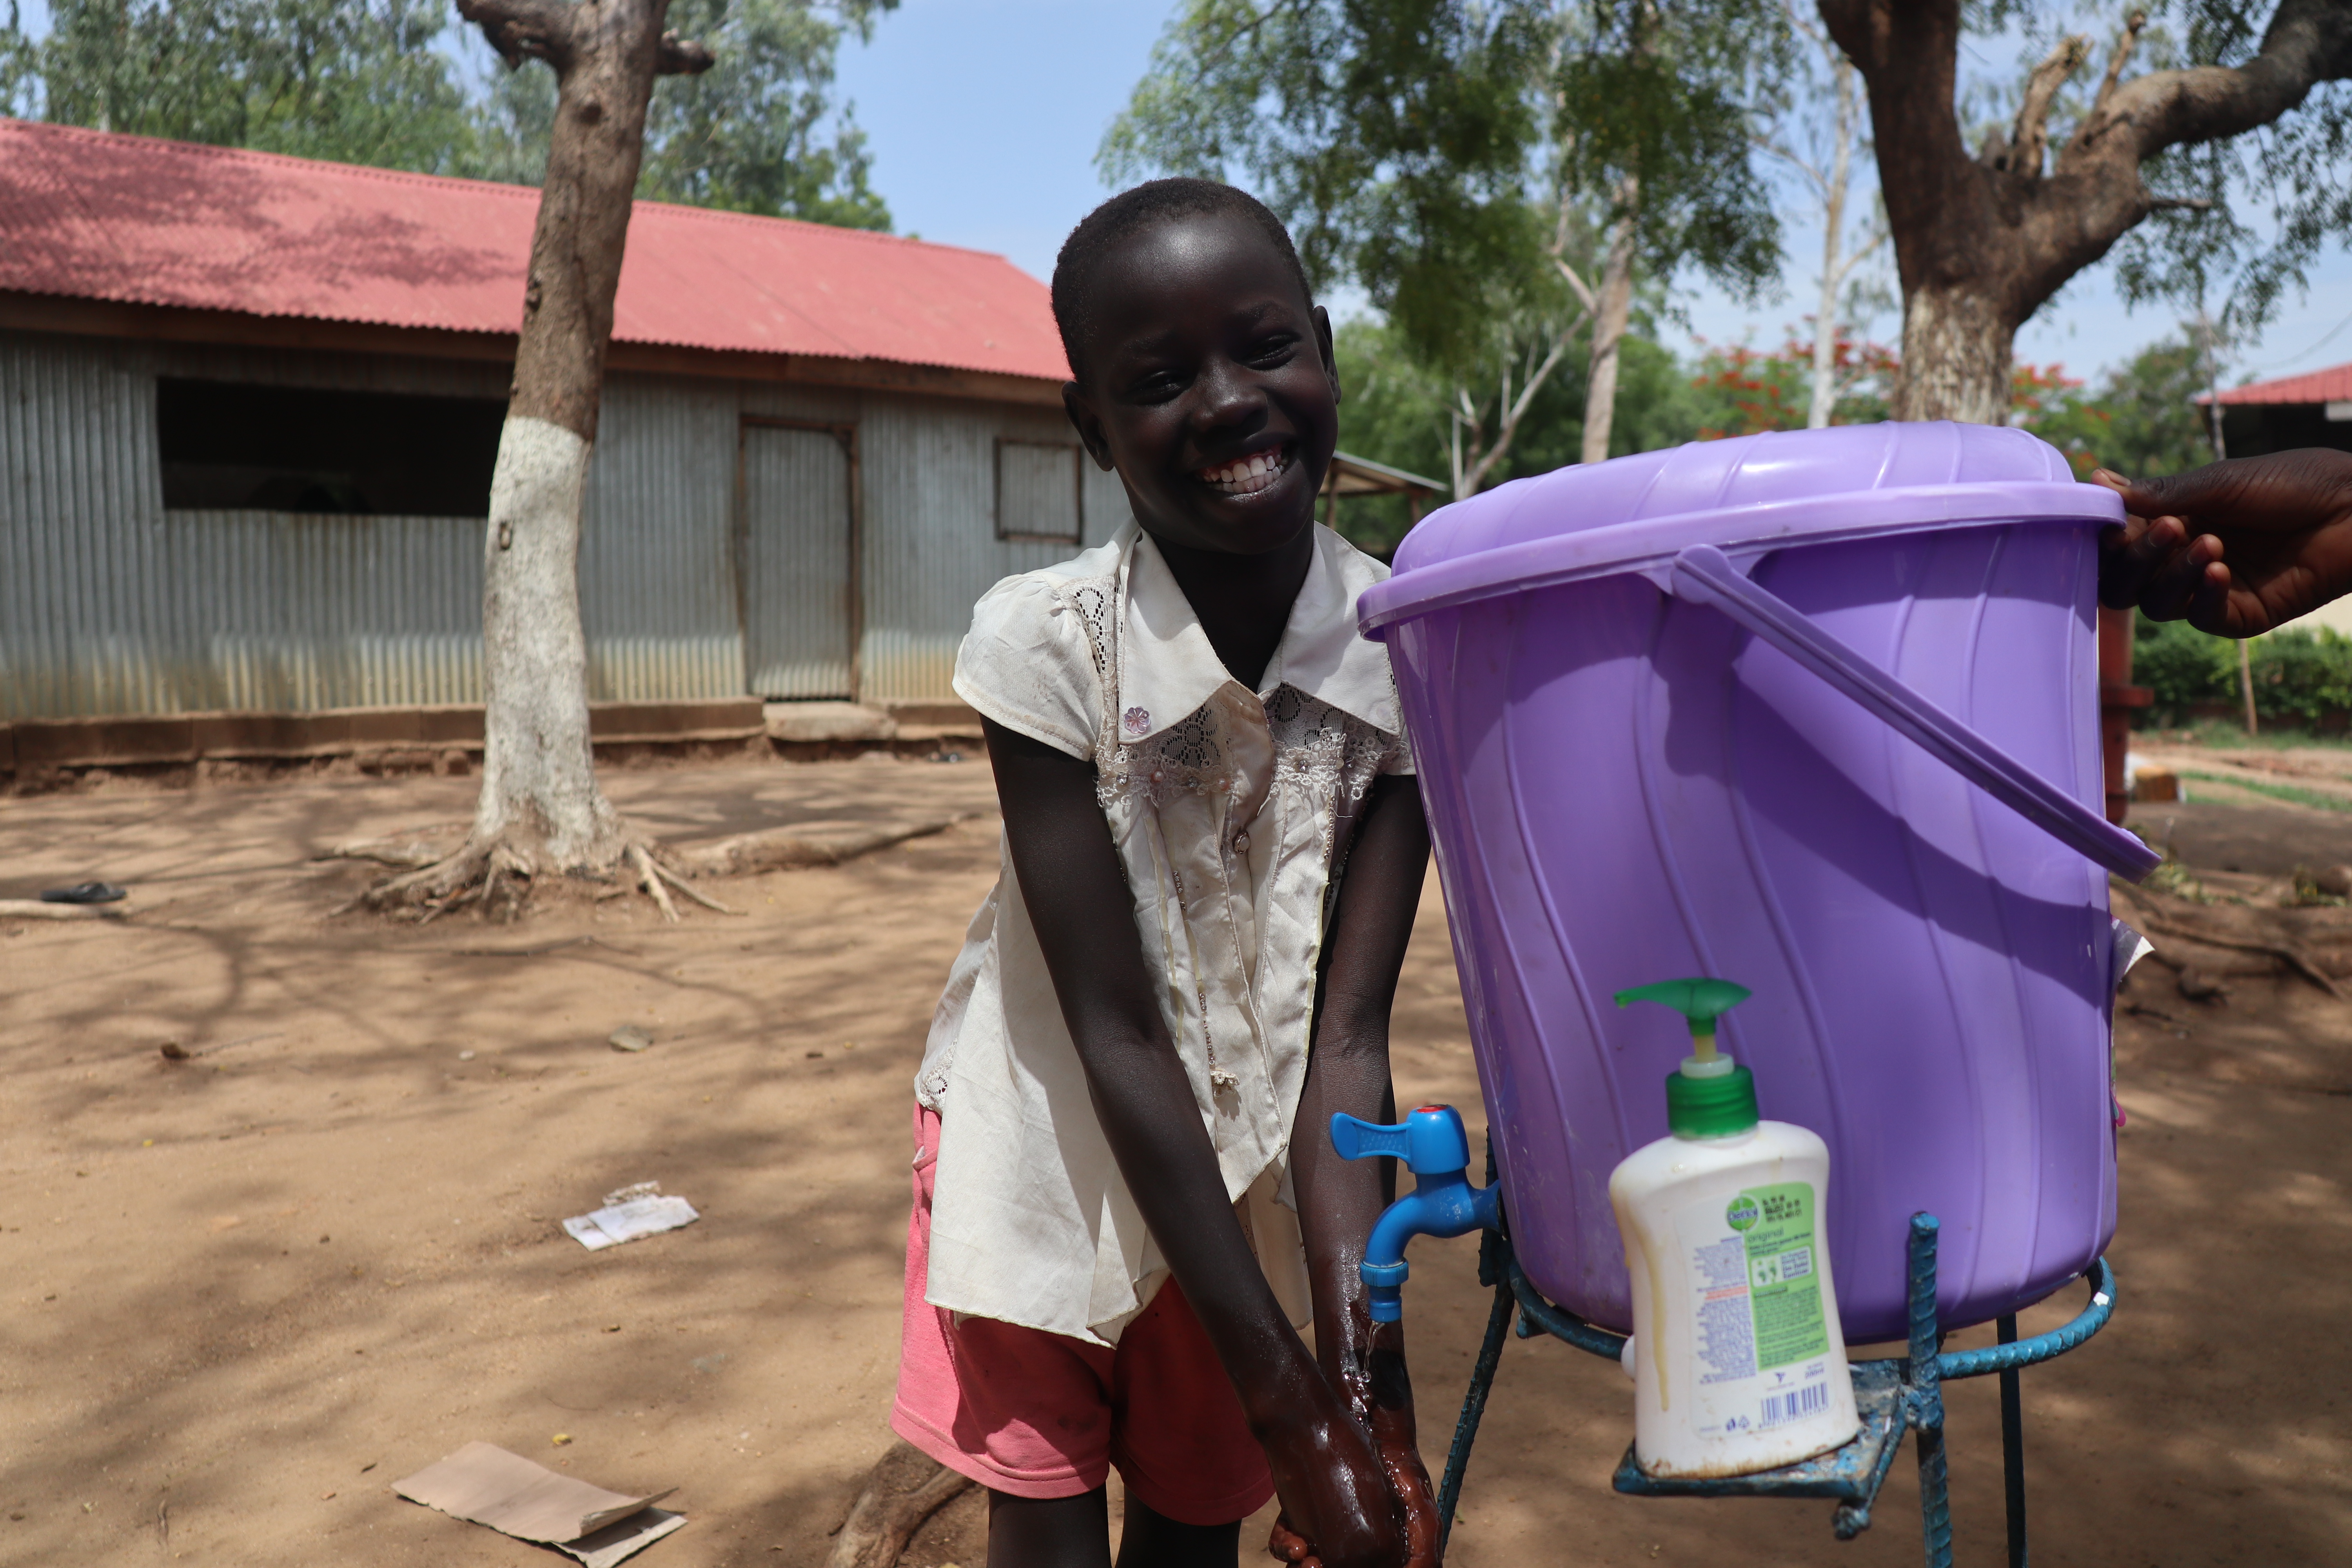 Girl in South Sudan smiles as she washes her hands in water from a purple bucket